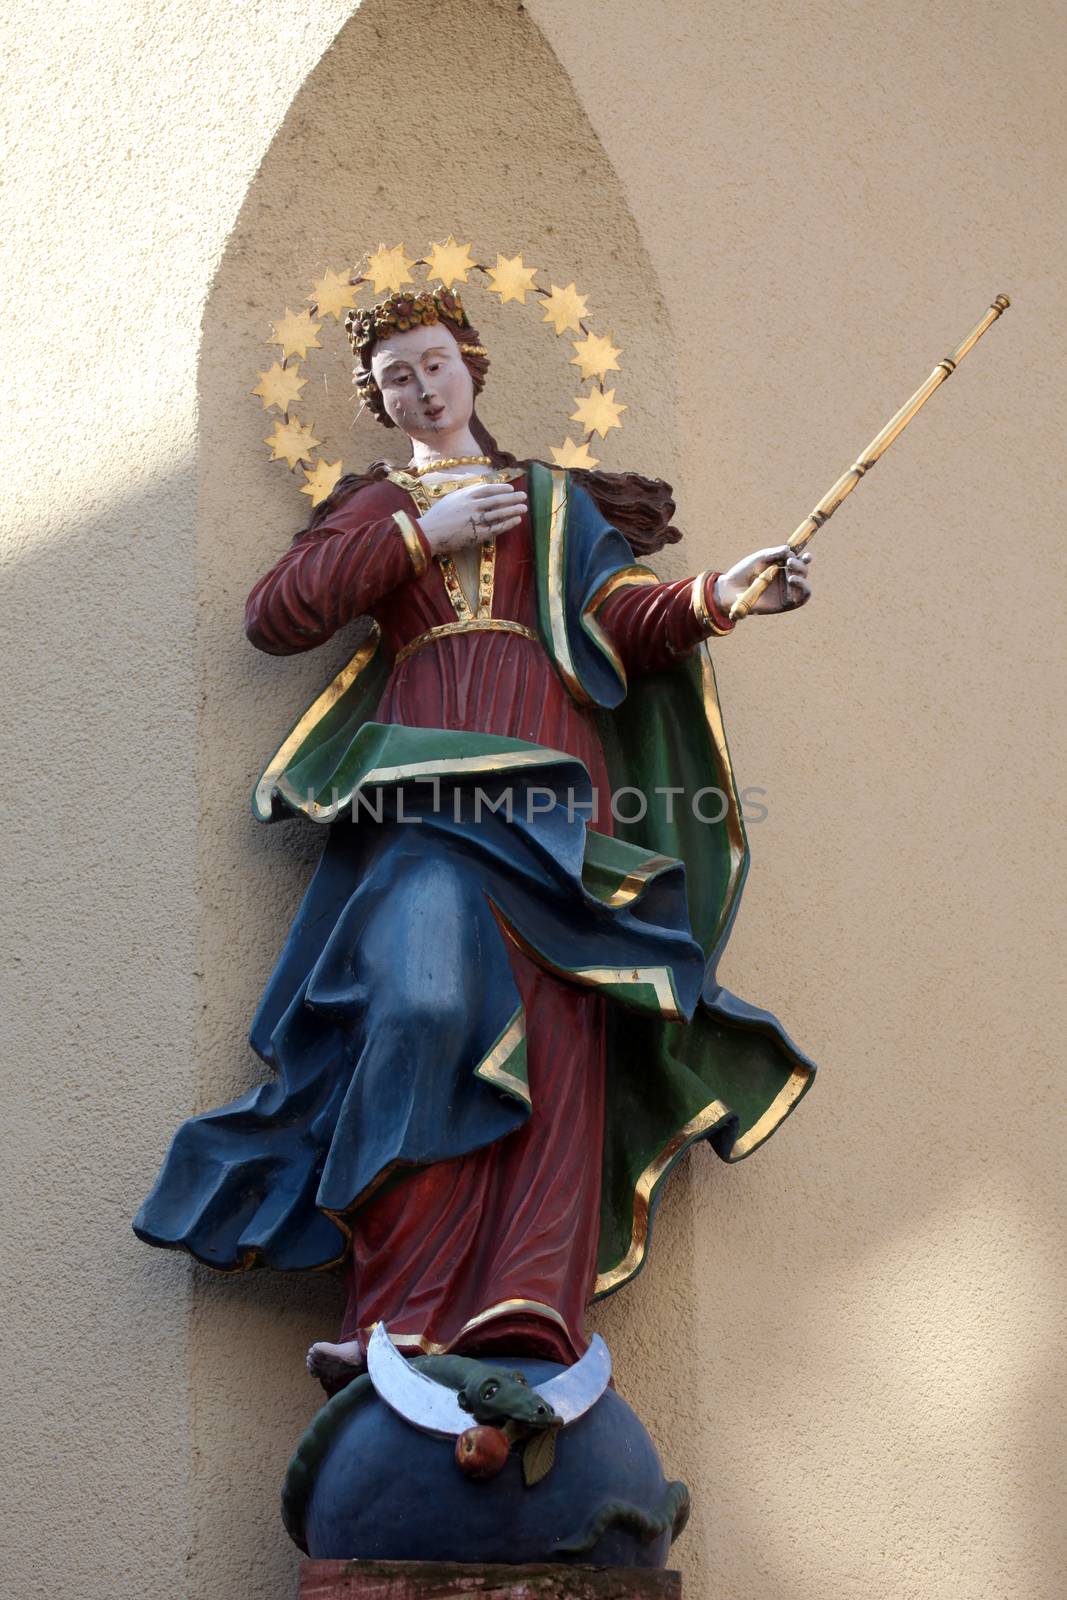 Statue of Virgin Mary, Main street of Miltenberg in Lower Franconia, Bavaria Germany